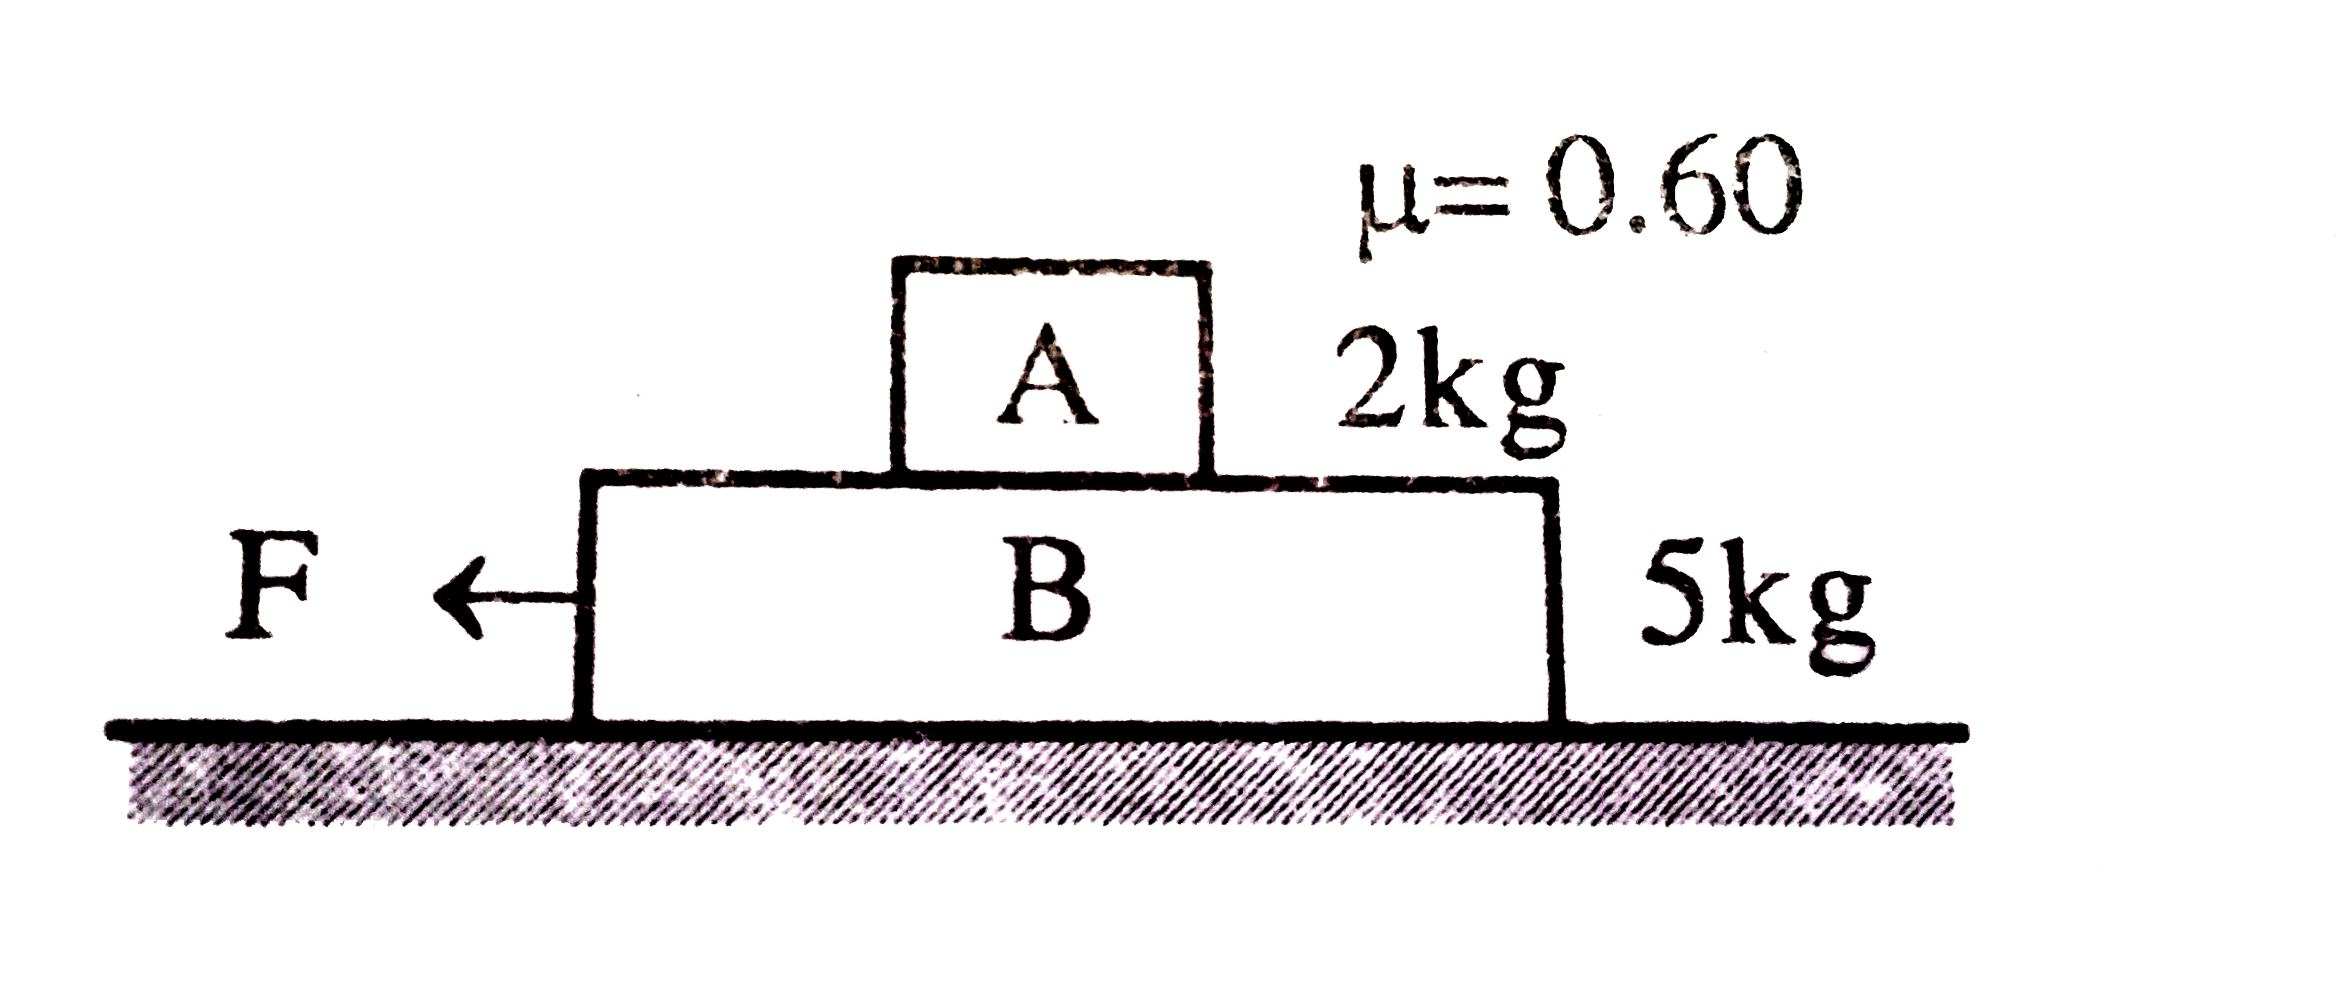 Two block (A) 2kg and (B) 5kg rest one over the other on a smooth horizontal plane. The cofficient of static and dynamic friction between (A) and (B) is the sae and equal to 0.60. The maximum horizontal force that can be applied to (B) in order that both (A) and (B) do not have any relative motion: